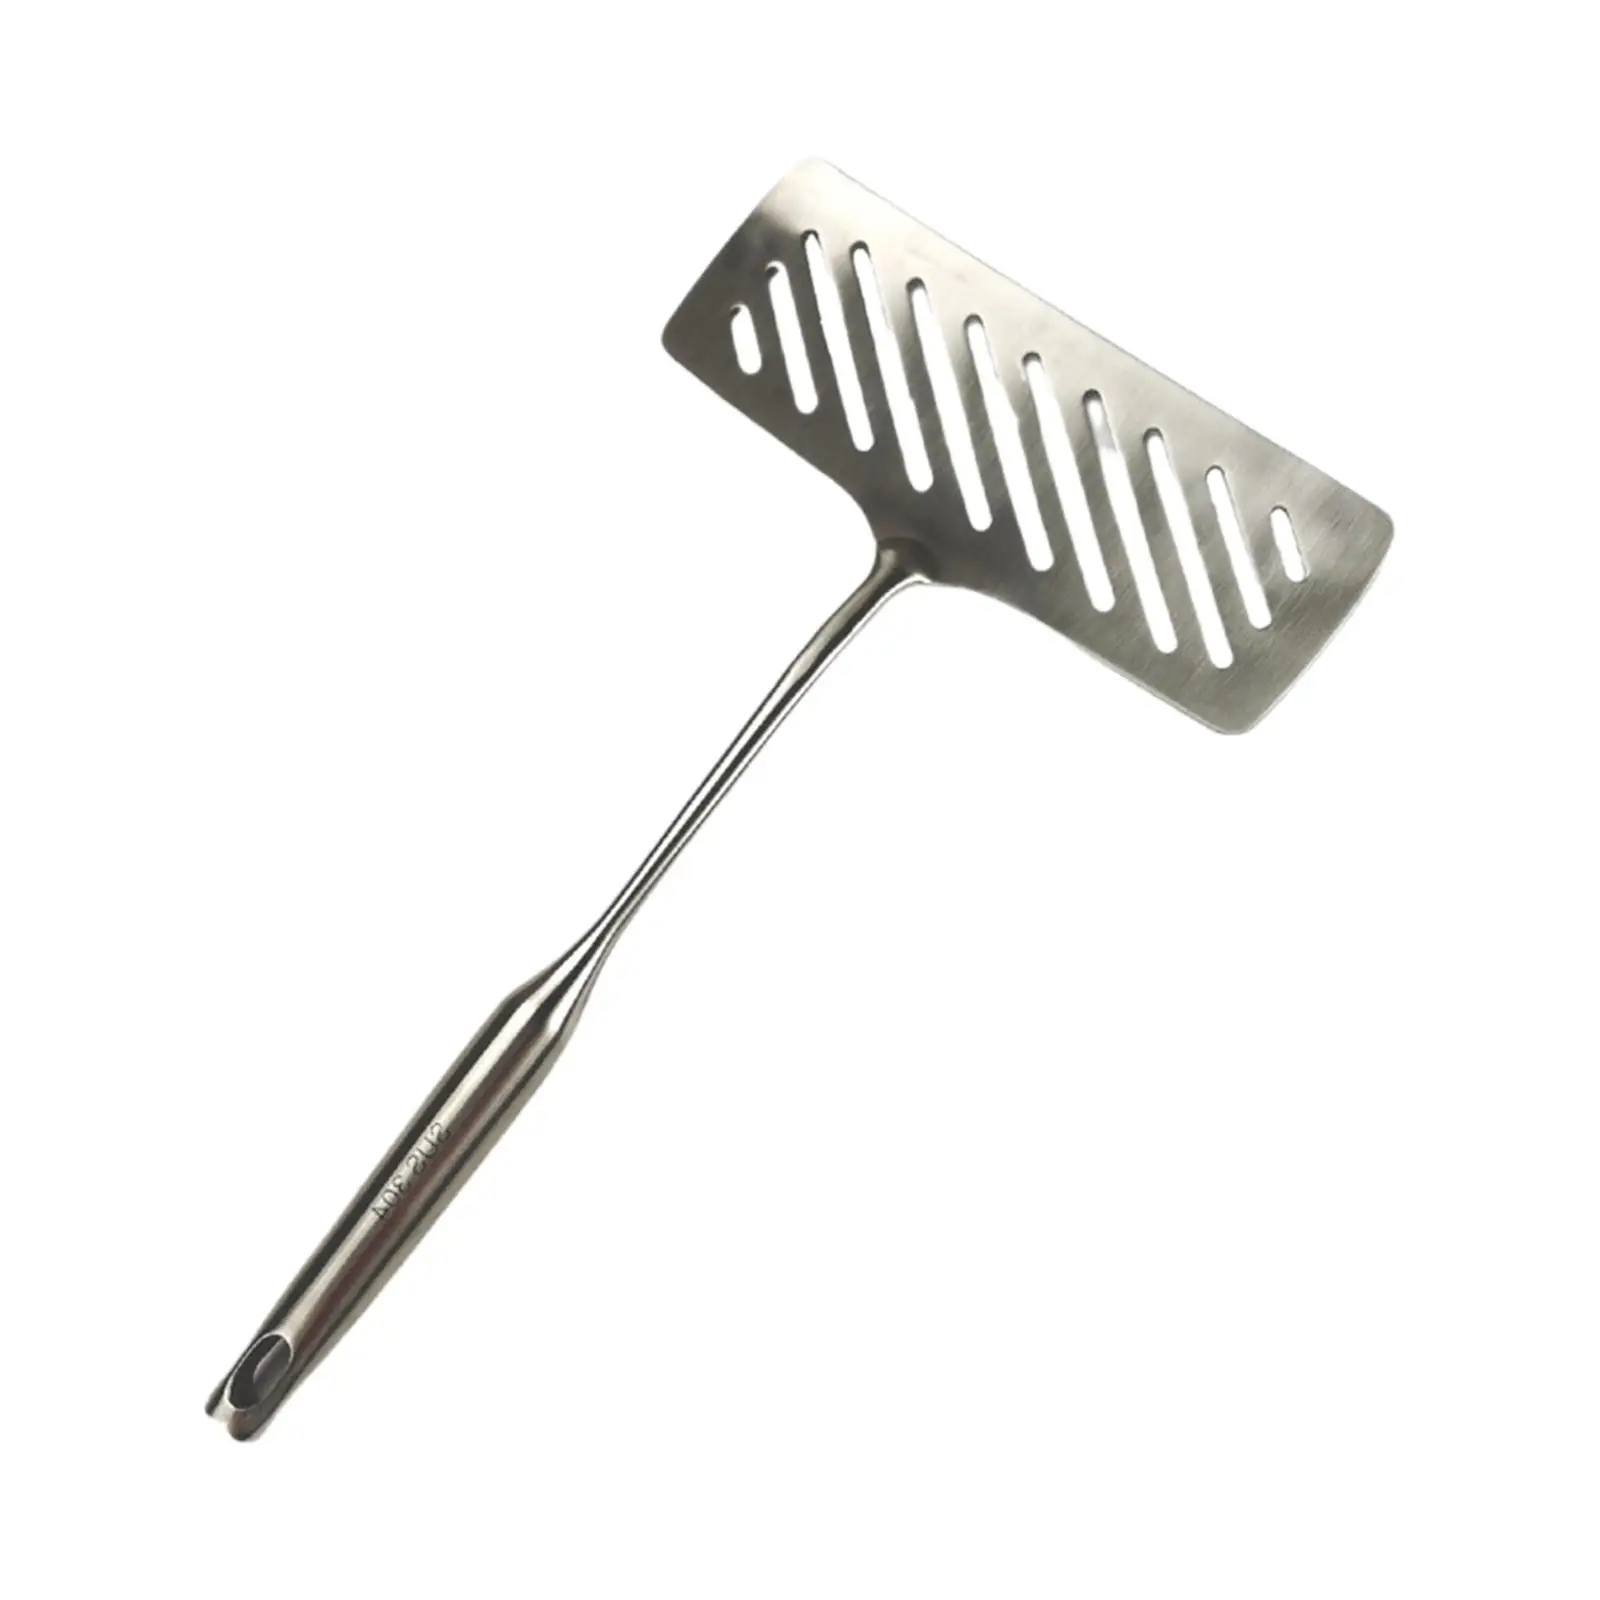 Steak Spatula Kitchen Tool Nonstick 304 Stainless Steel Cooking Cookware Omelette Pancake Spatula Egg Turner Fish Spatula Turner